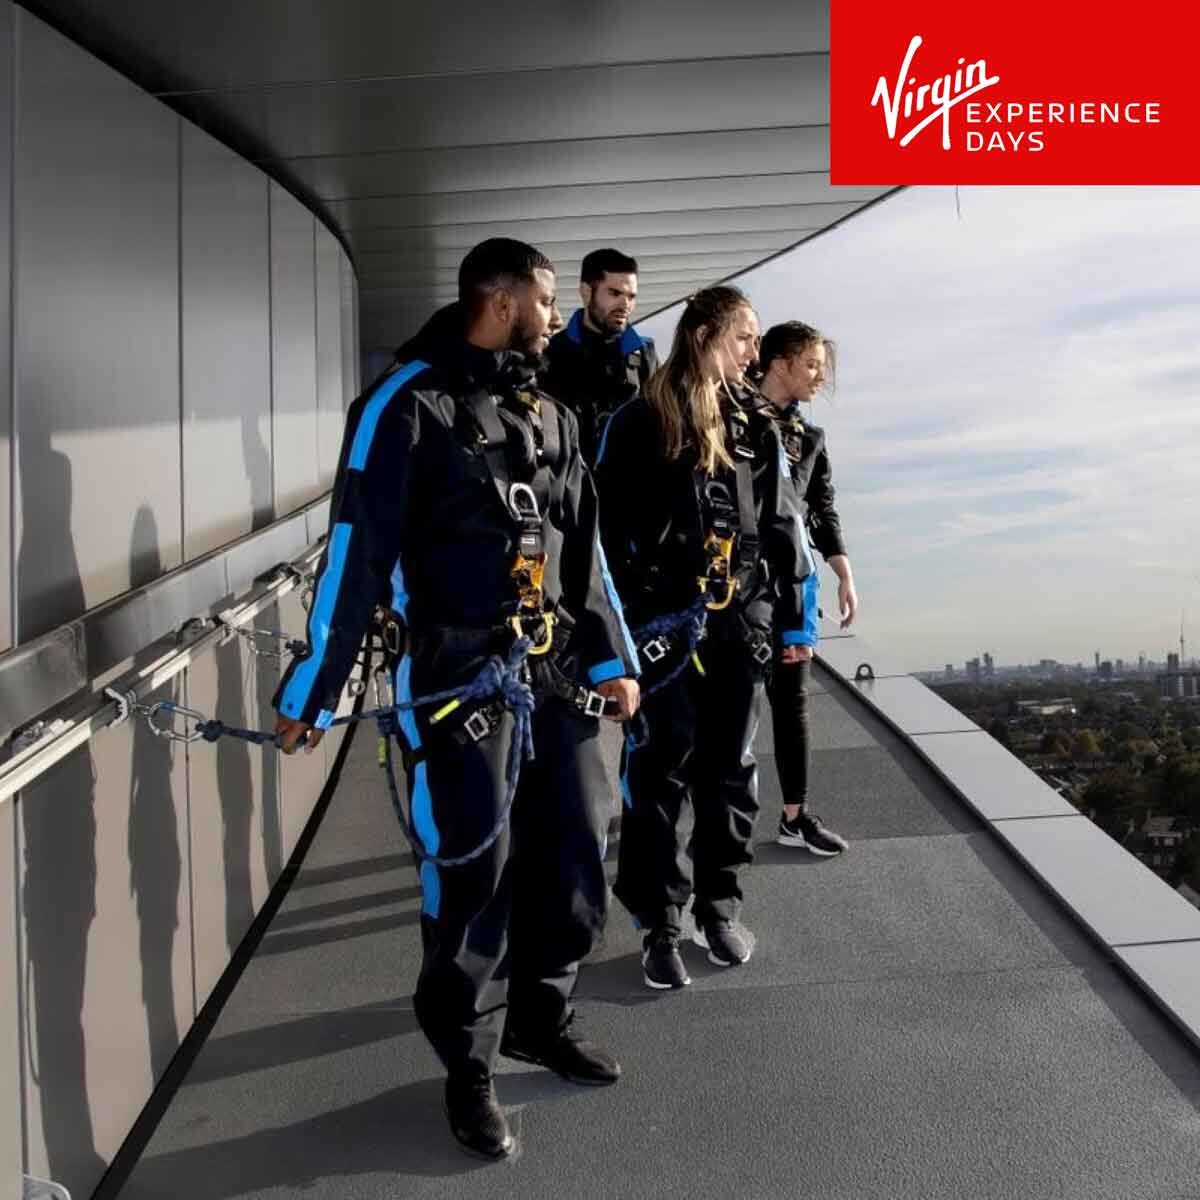 Virgin Experience Days The Dare Skywalk for Two At Tottenham Hotspur Stadium (8+ Years)